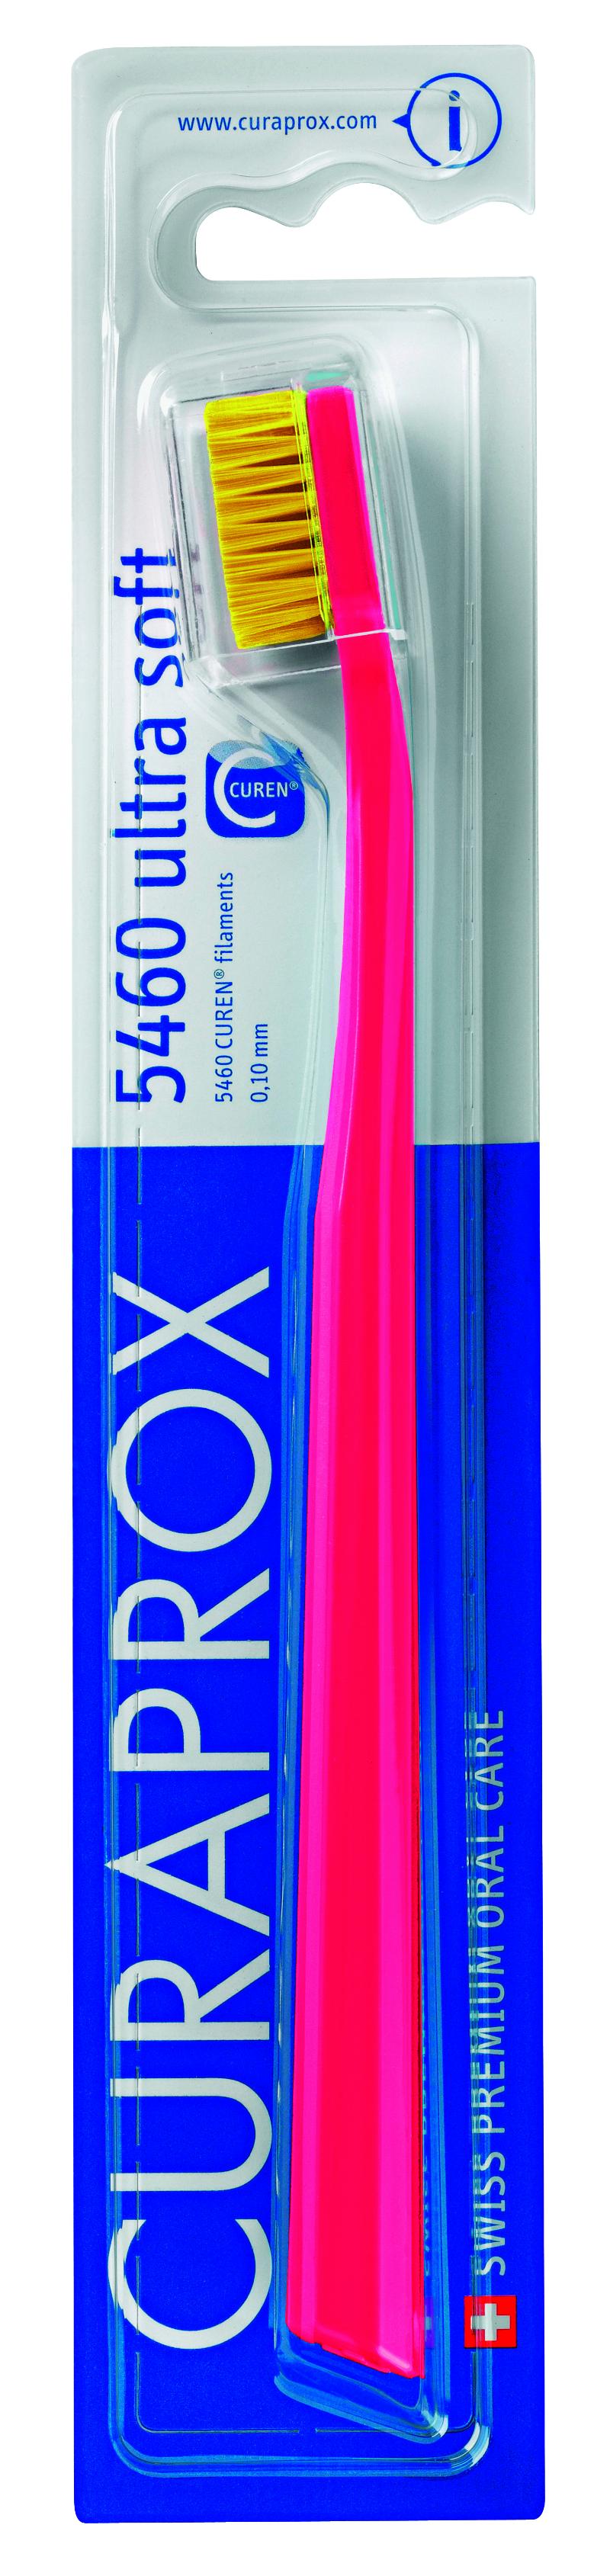 Curaprox - 5460 Ultra Soft Toothbrush Mixed colors 1 pc